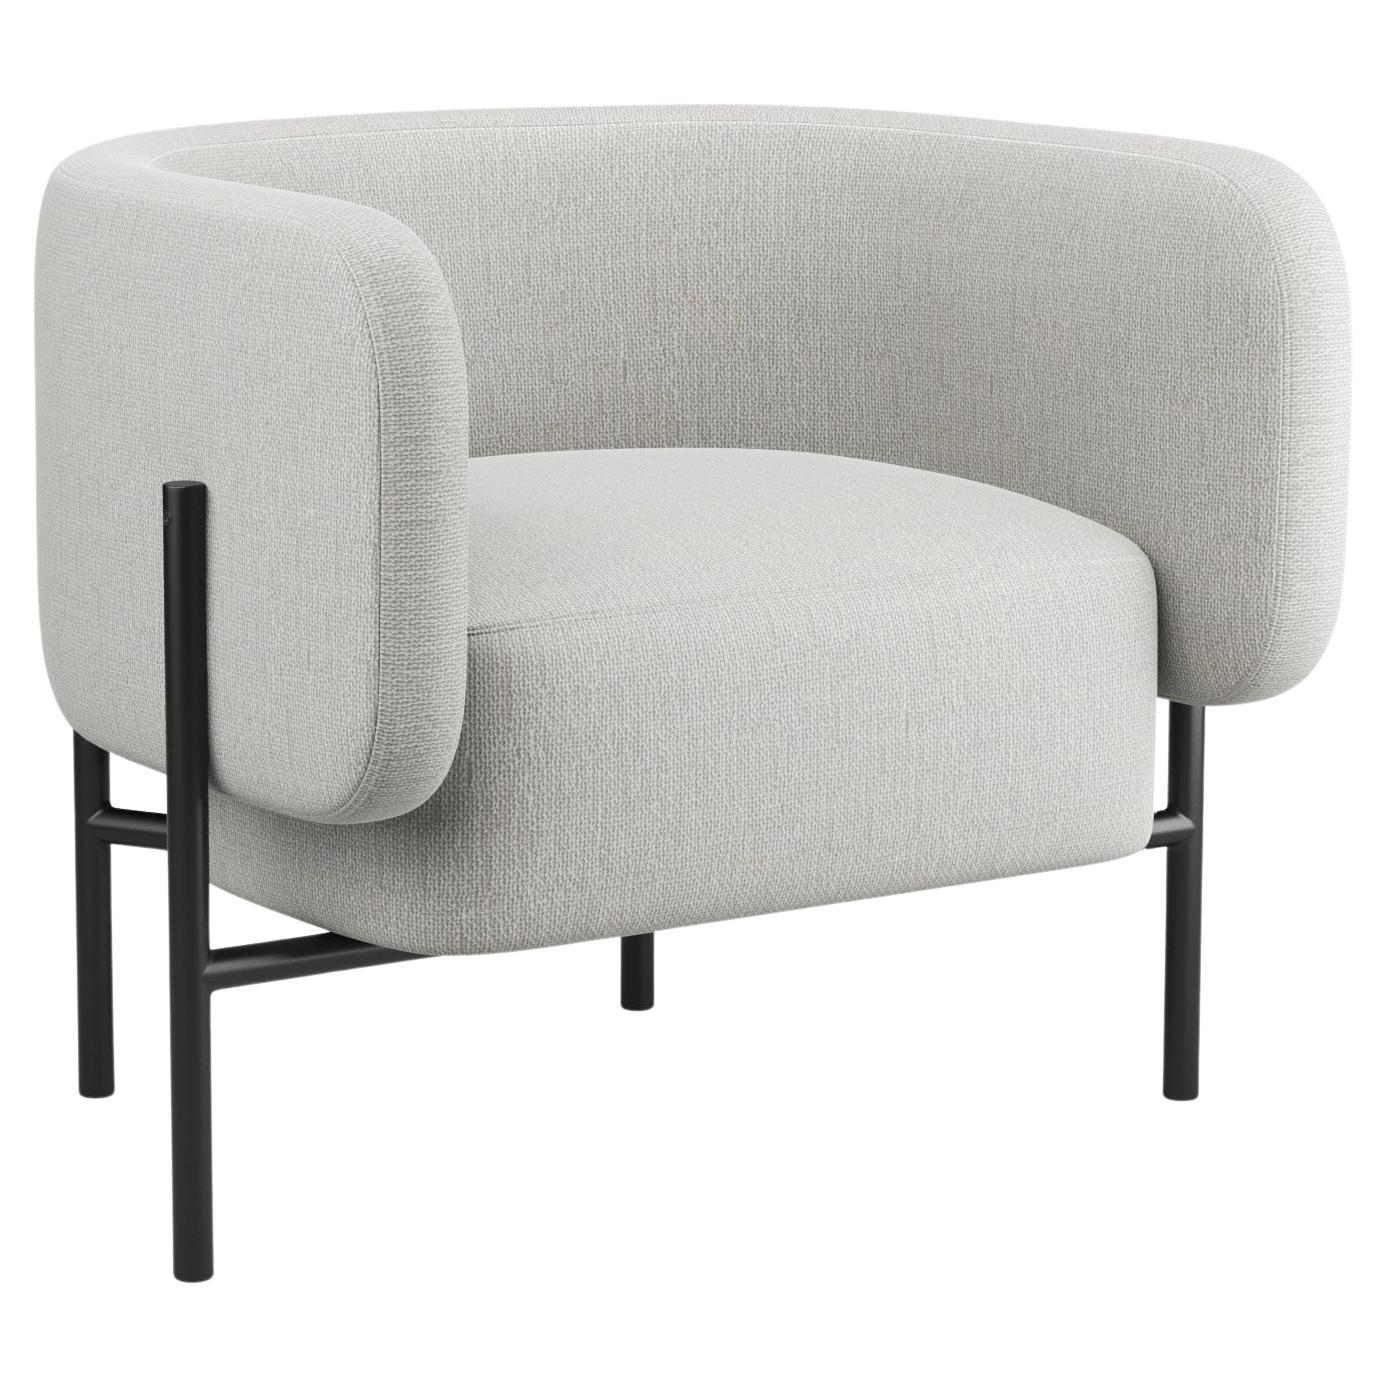 Hayche Abrazo Armchair - Gravel, UK, Made to Order For Sale